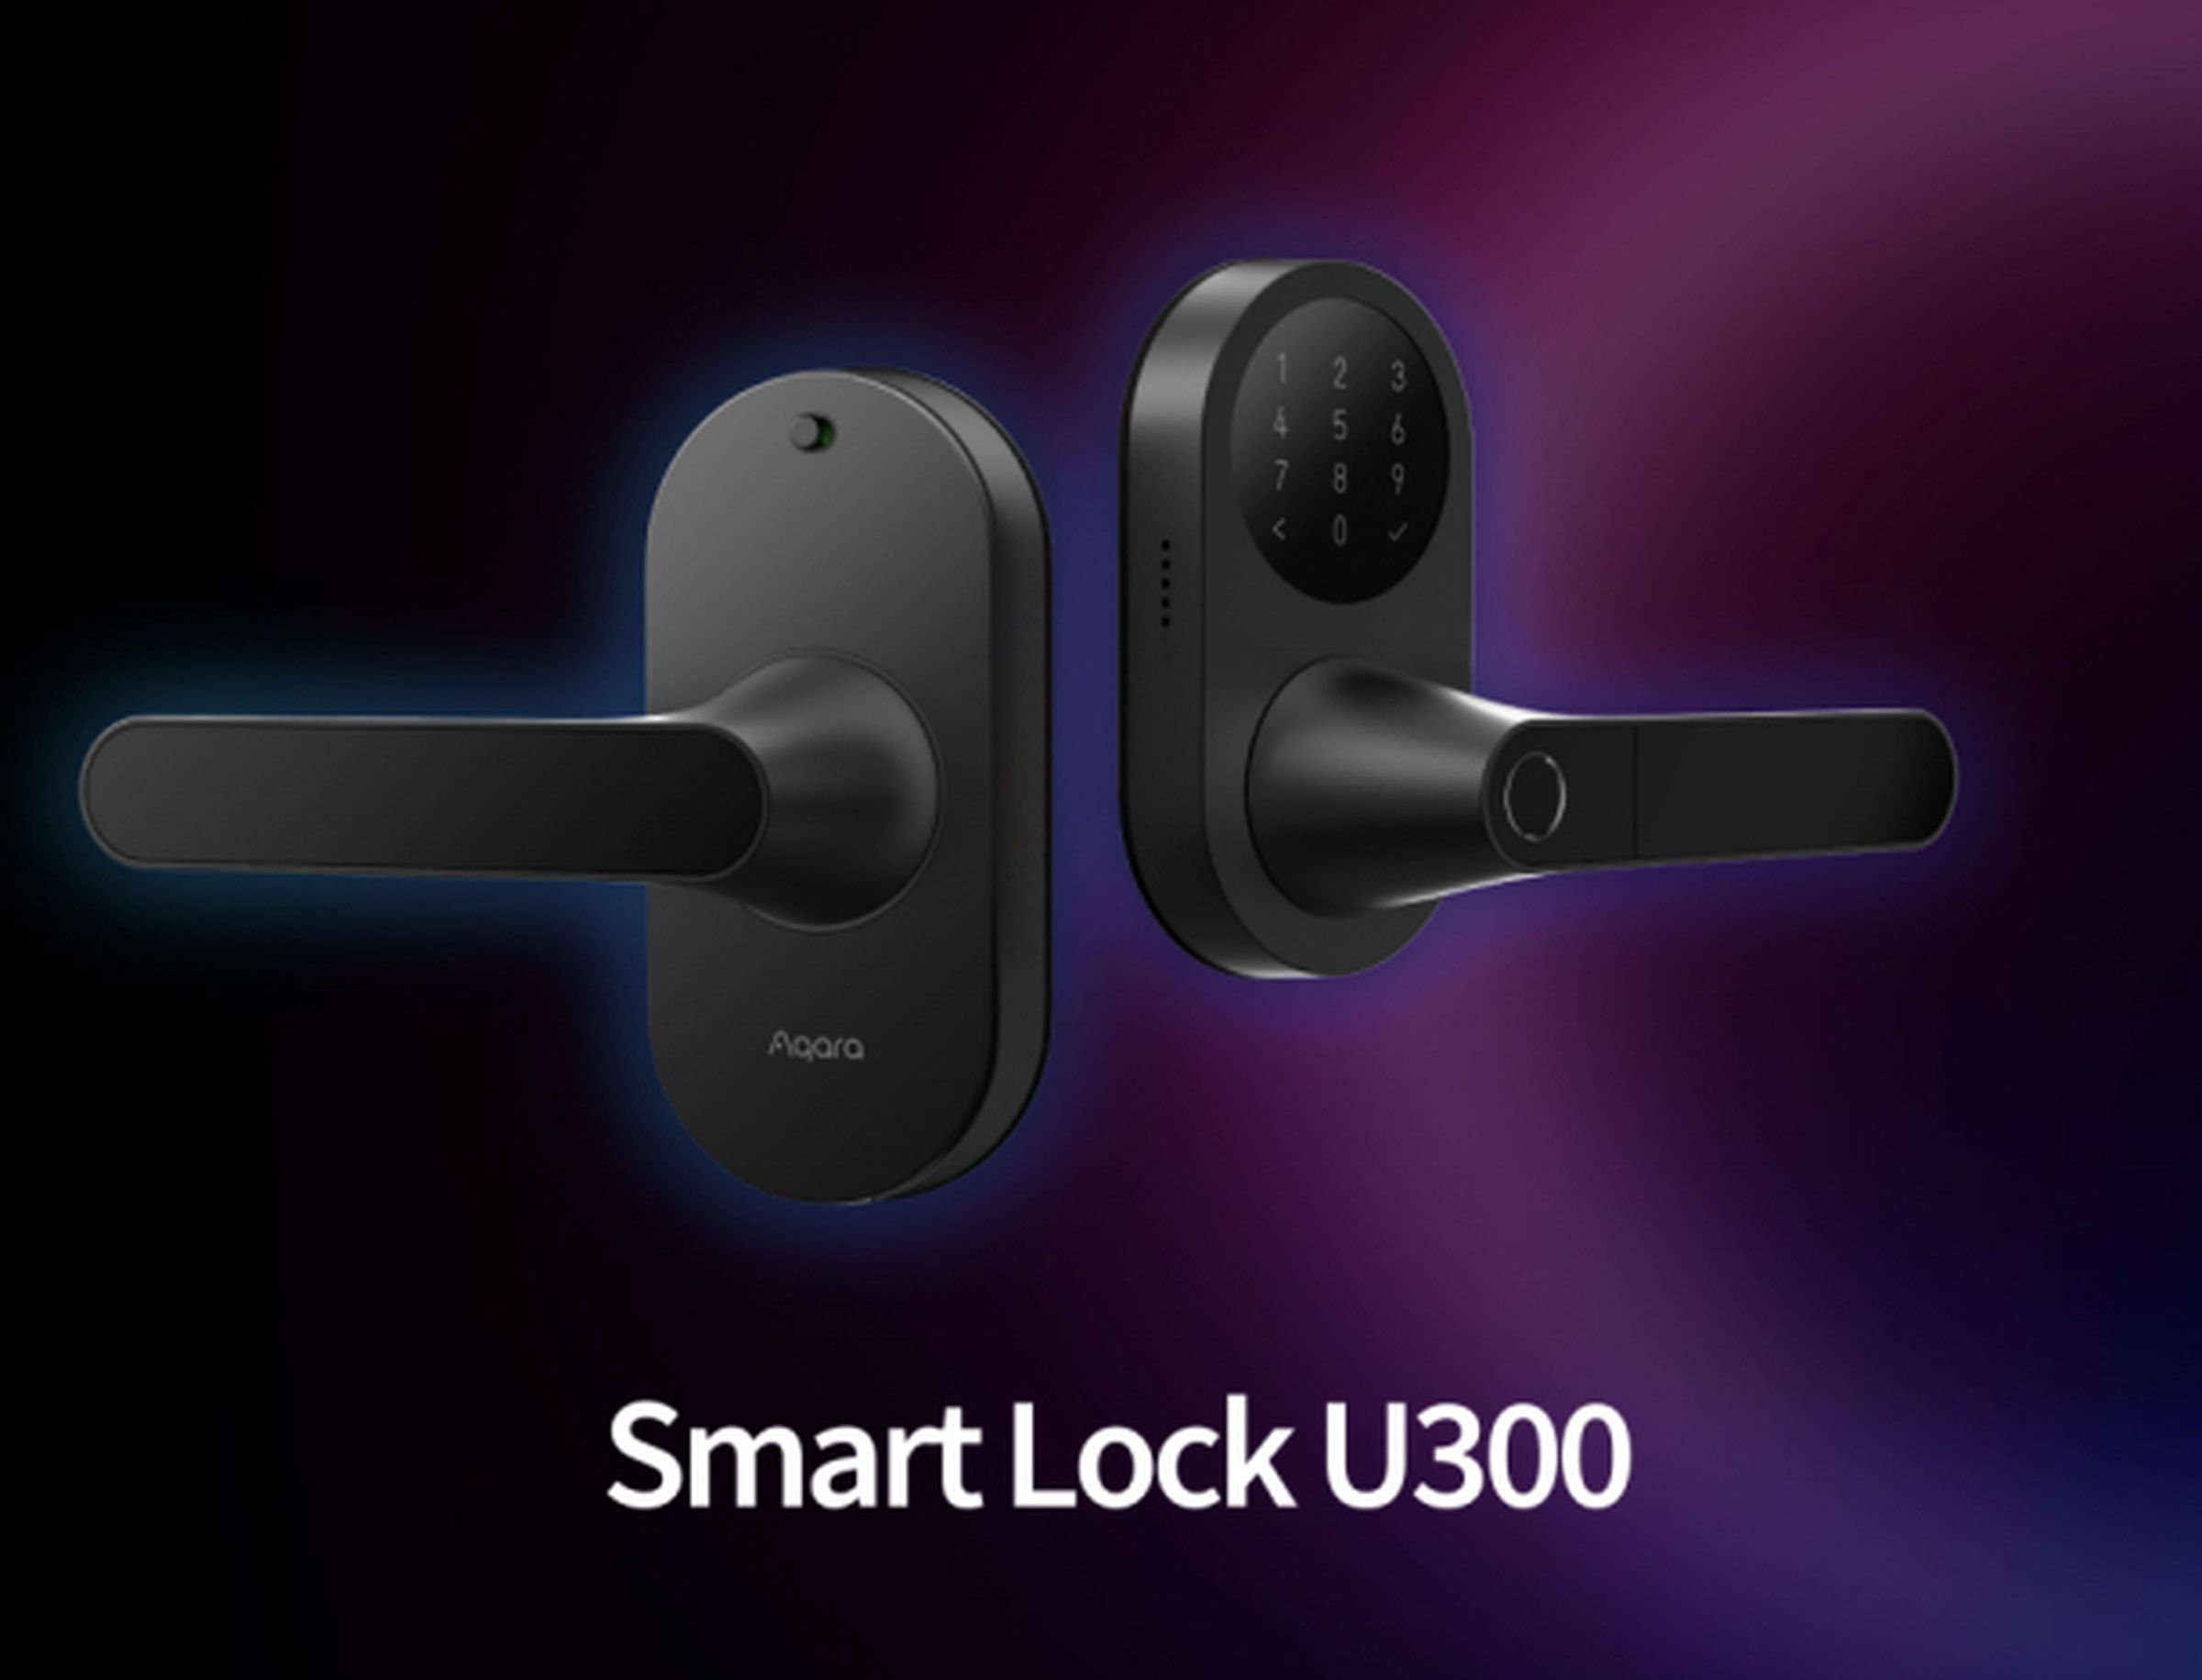 The Aqara Smart Lock U300 is the company’s first Thread-based smart lever lock. It has a keypad and fingerprint reader for access.